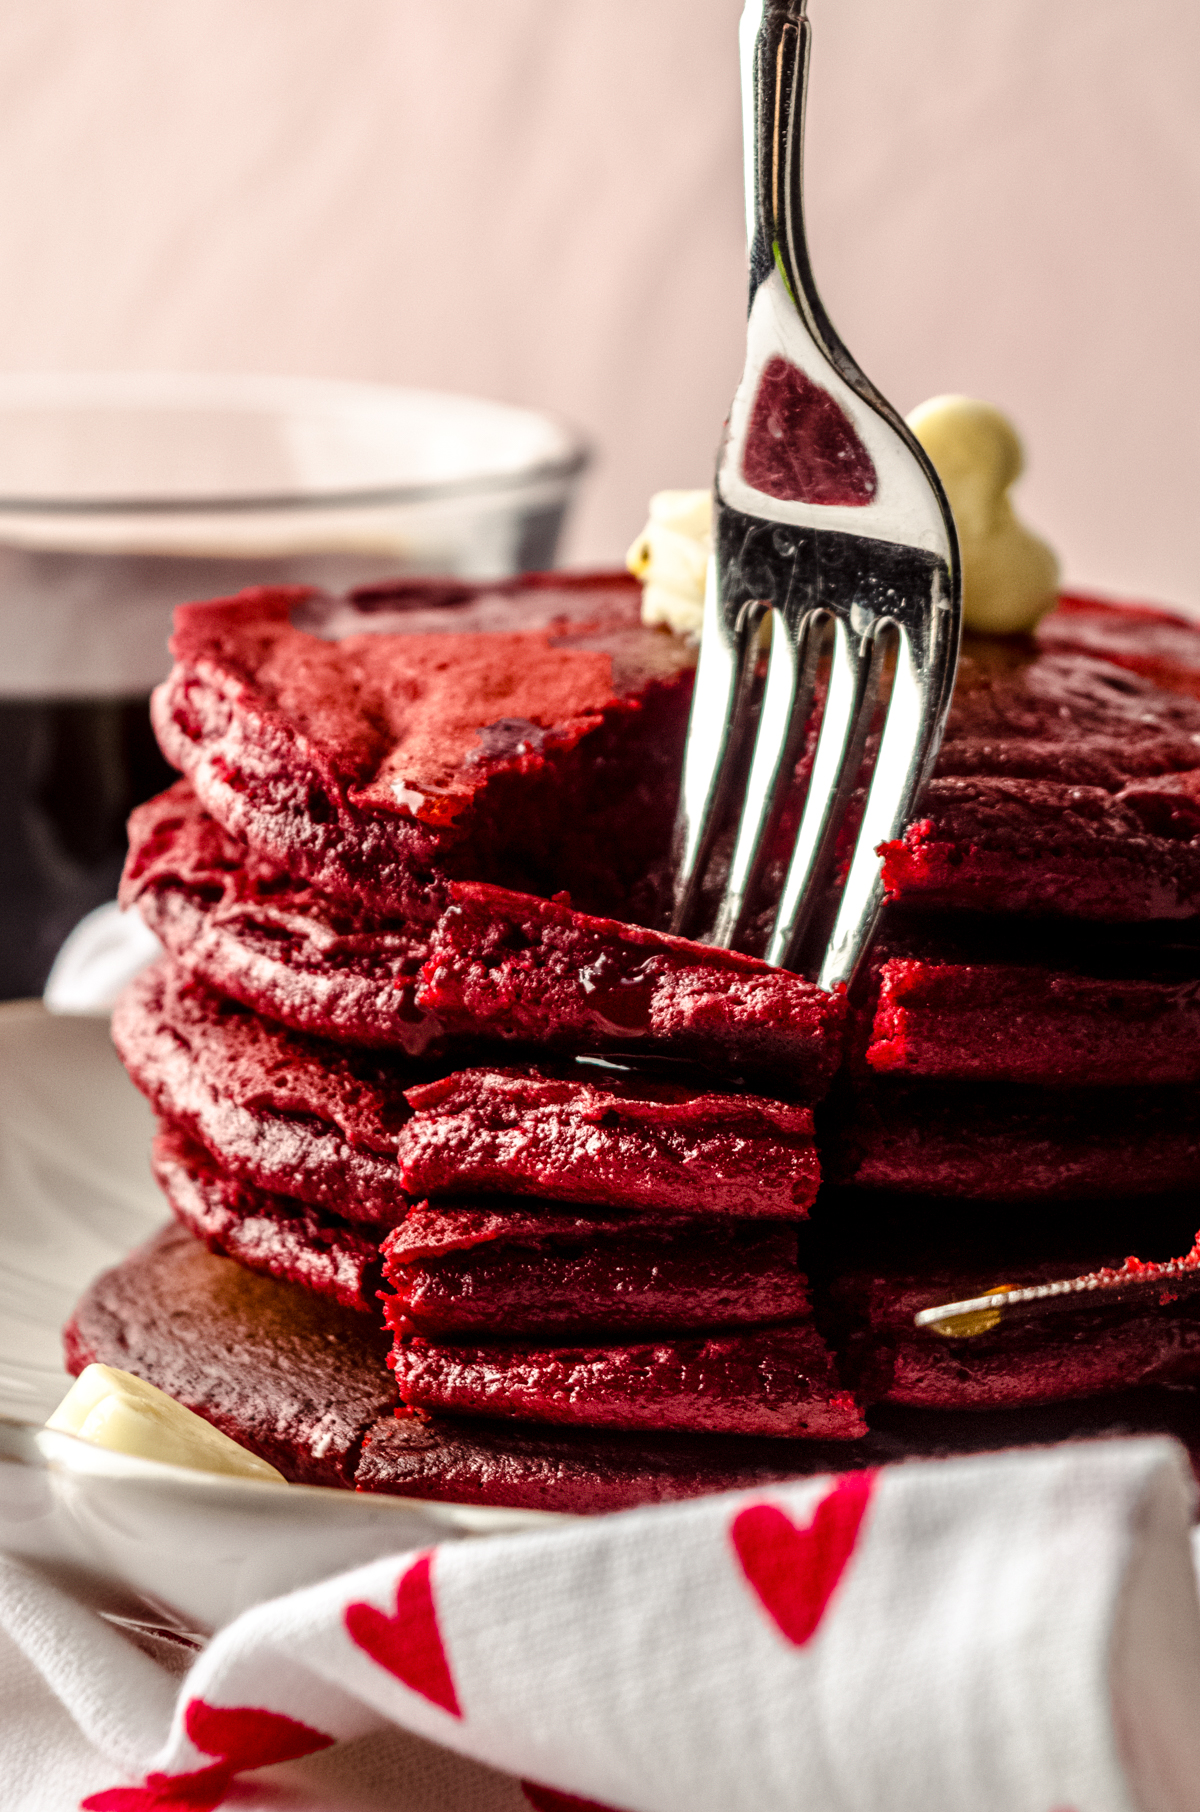 A fork digging into a stack of red velvet pancakes. There is syrup dripping down the sides and little butter hearts on top of the pancakes.